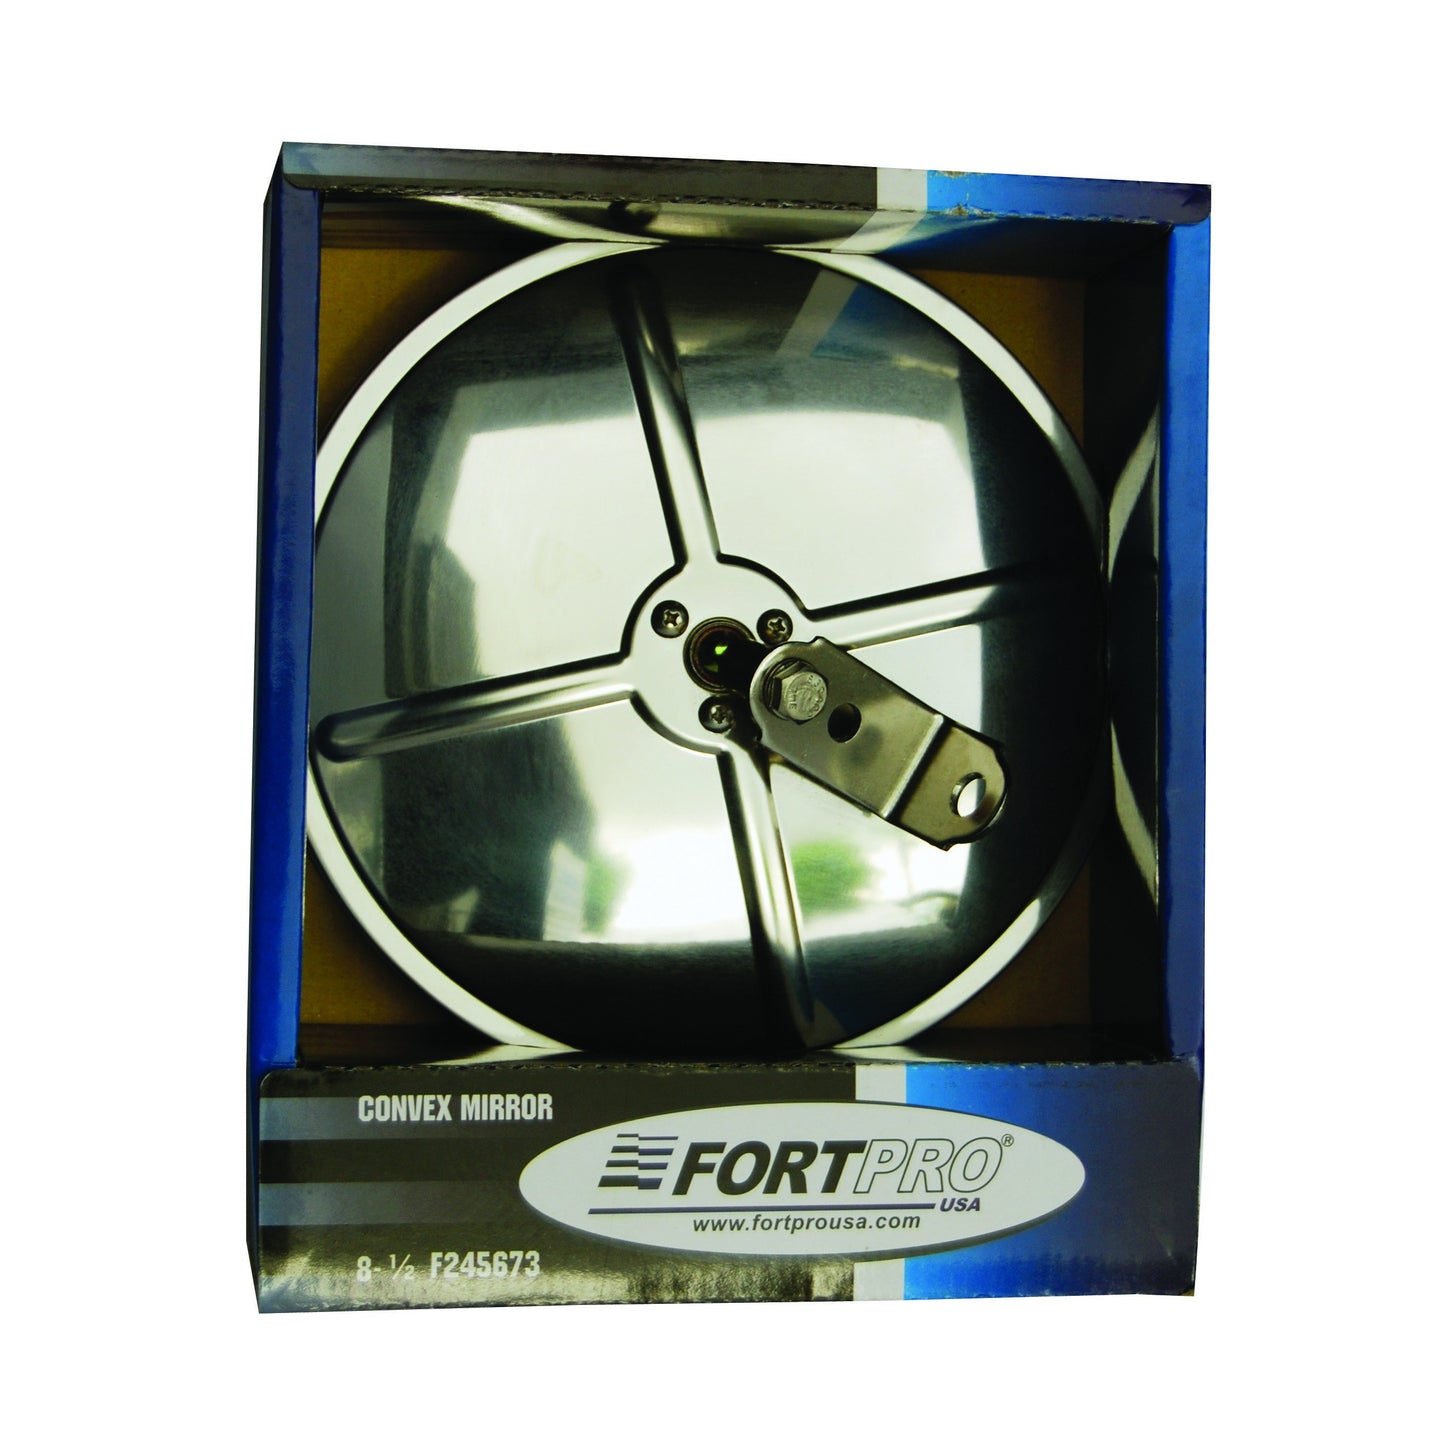 Fortpro 8 1/2" Convex Mirror Stainless Steel with Center Stud Mount | F245673